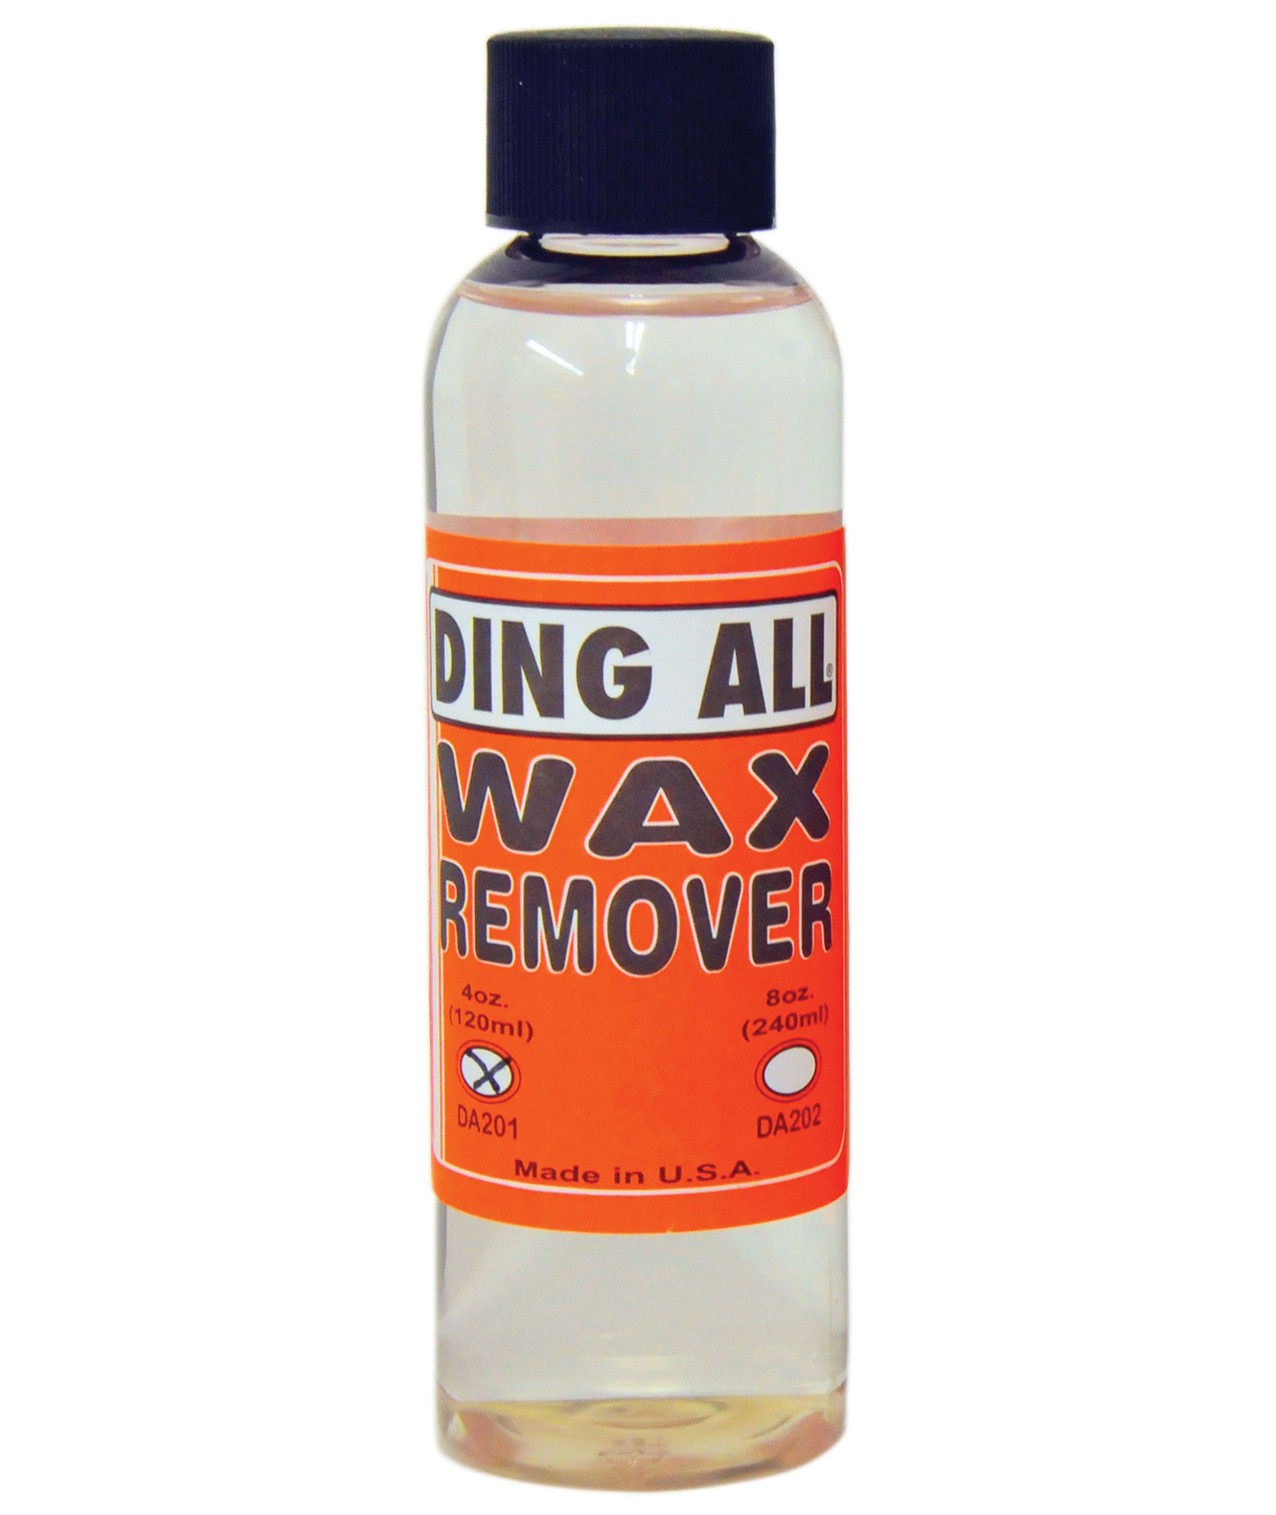 DING ALL - Wax Remover 4oz